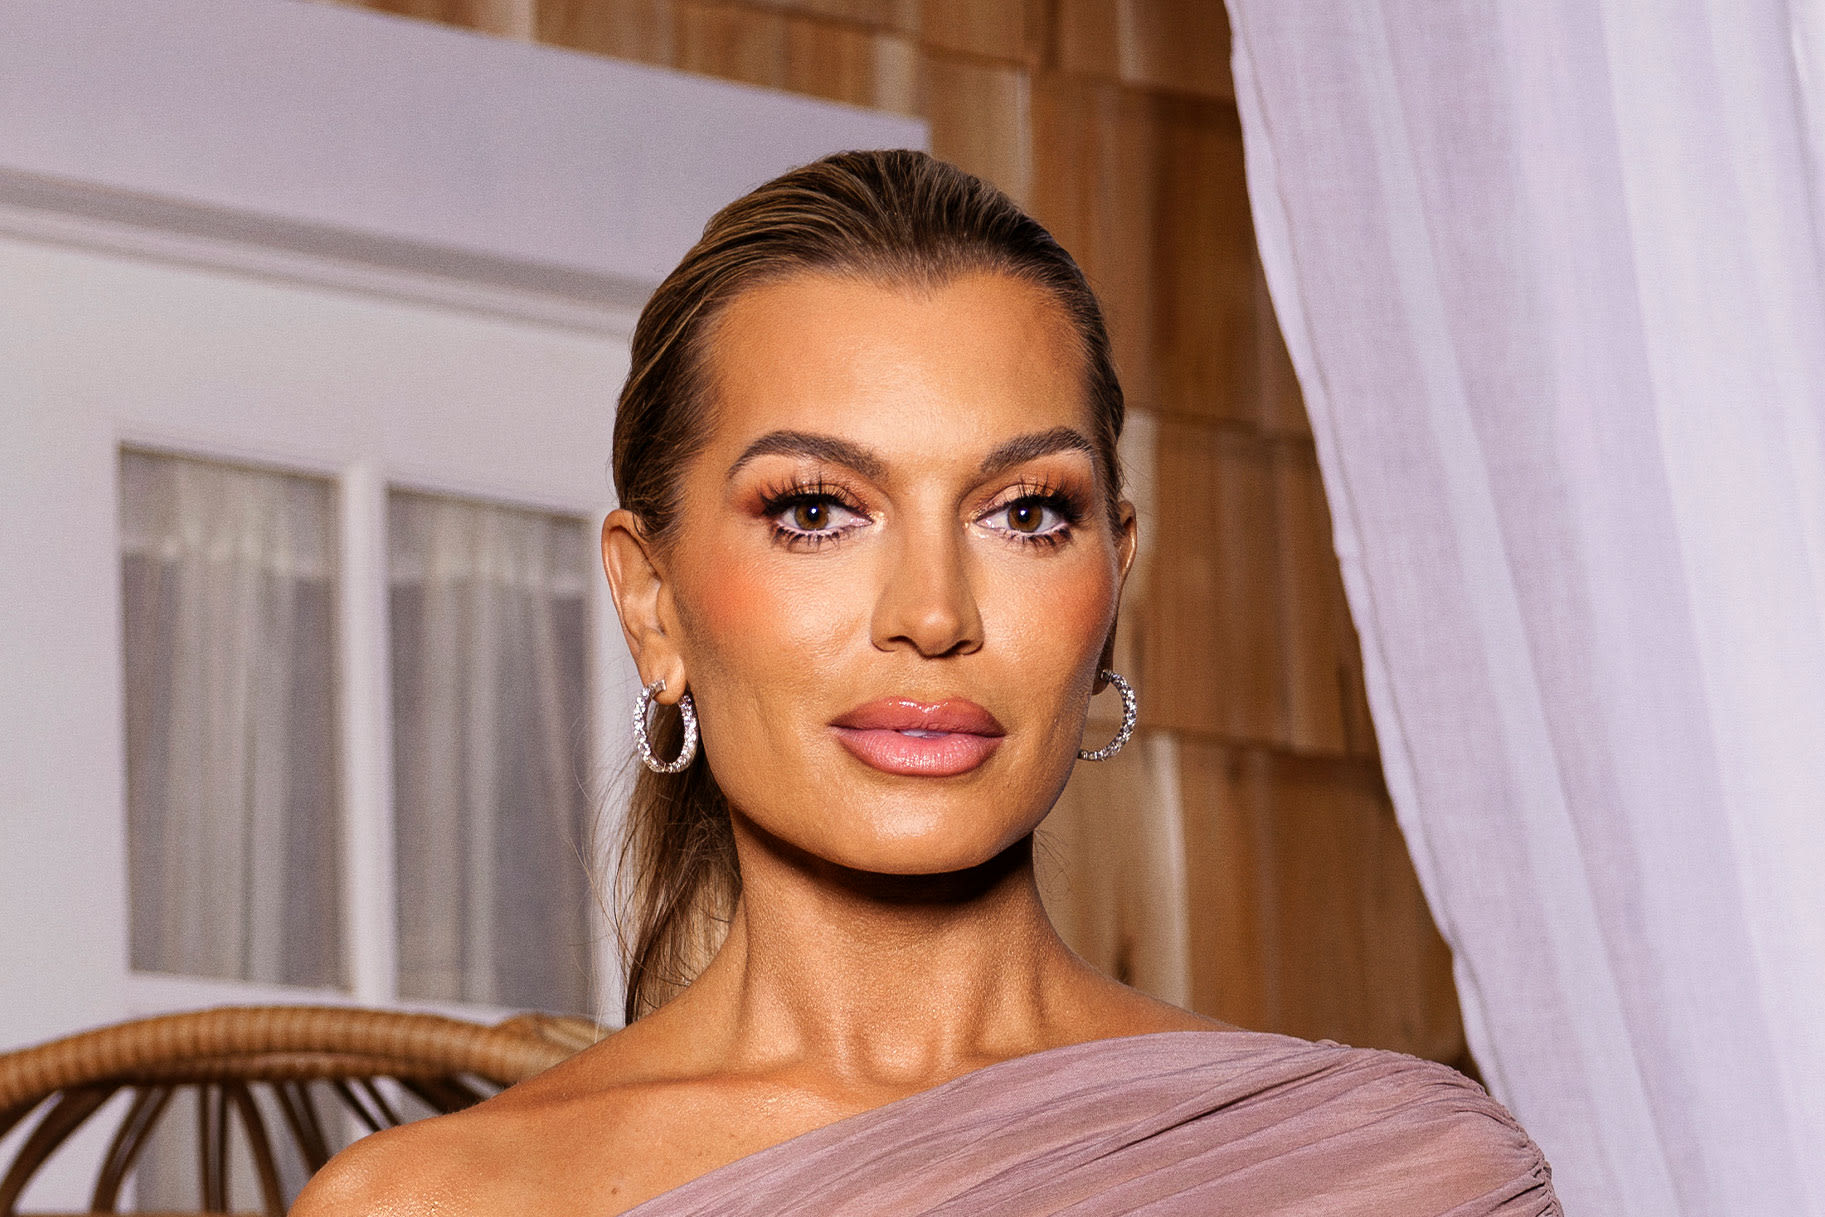 Lindsay Hubbard Claps Back At People Saying She Has Too Much Lip Filler: "Go Off" | Bravo TV Official Site